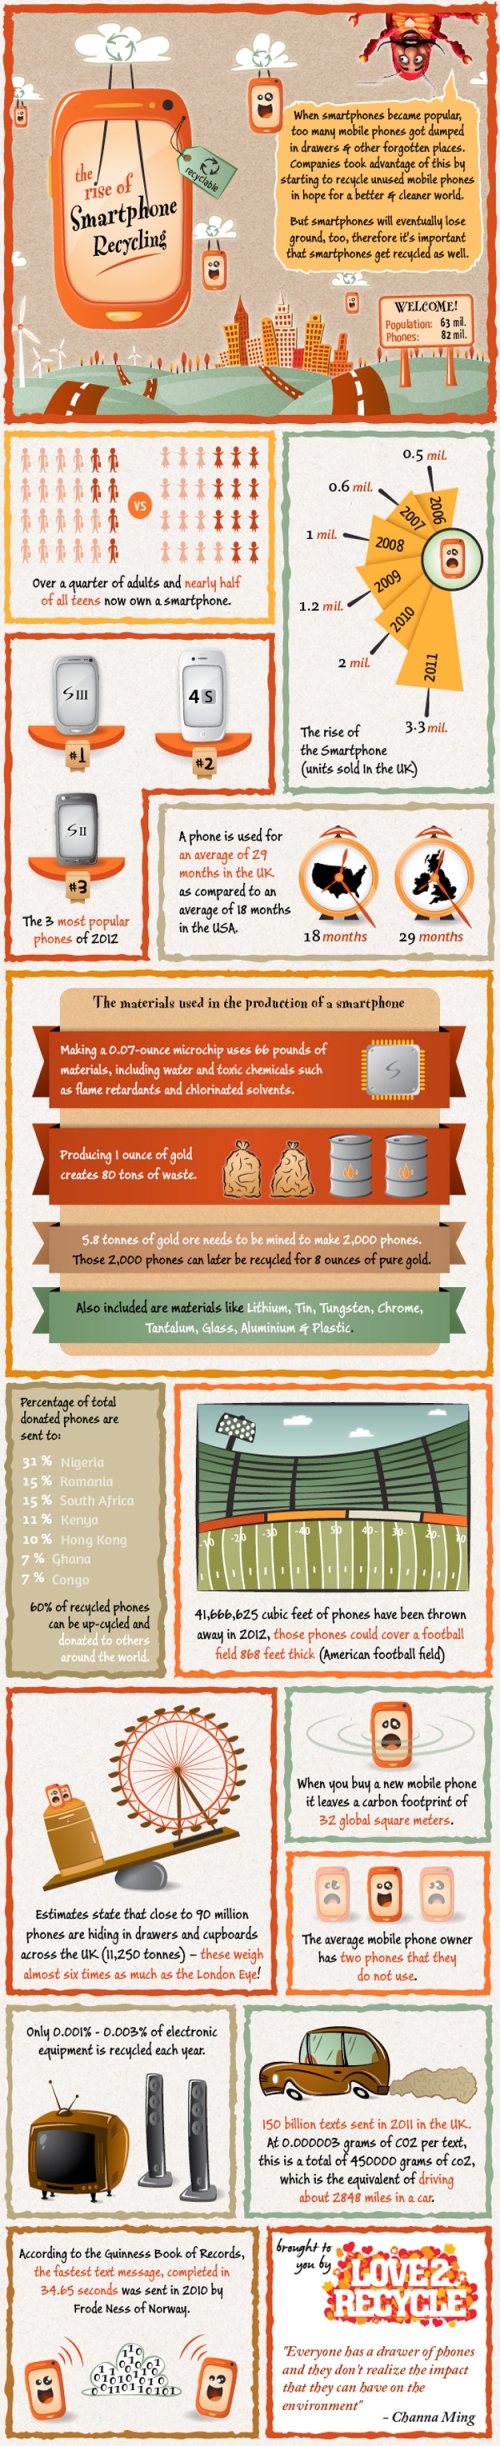 rise-of-smartphone-recycling-infographic